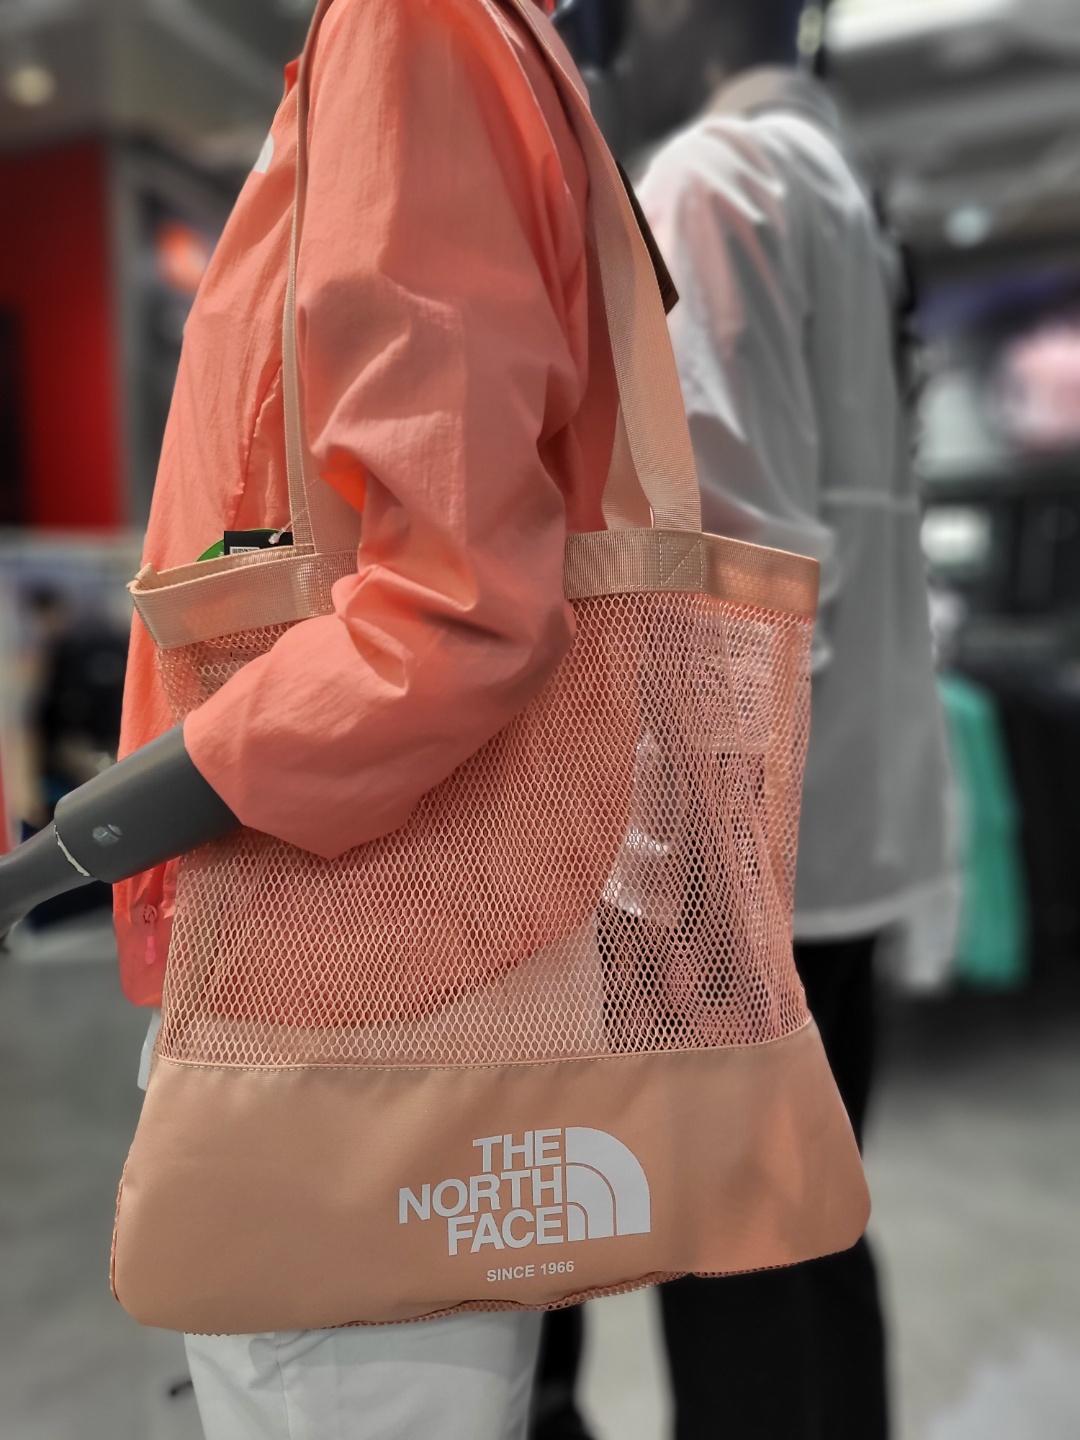 THE NORTH FACE - ALL MESH SHOULDER BAG (SALMON)